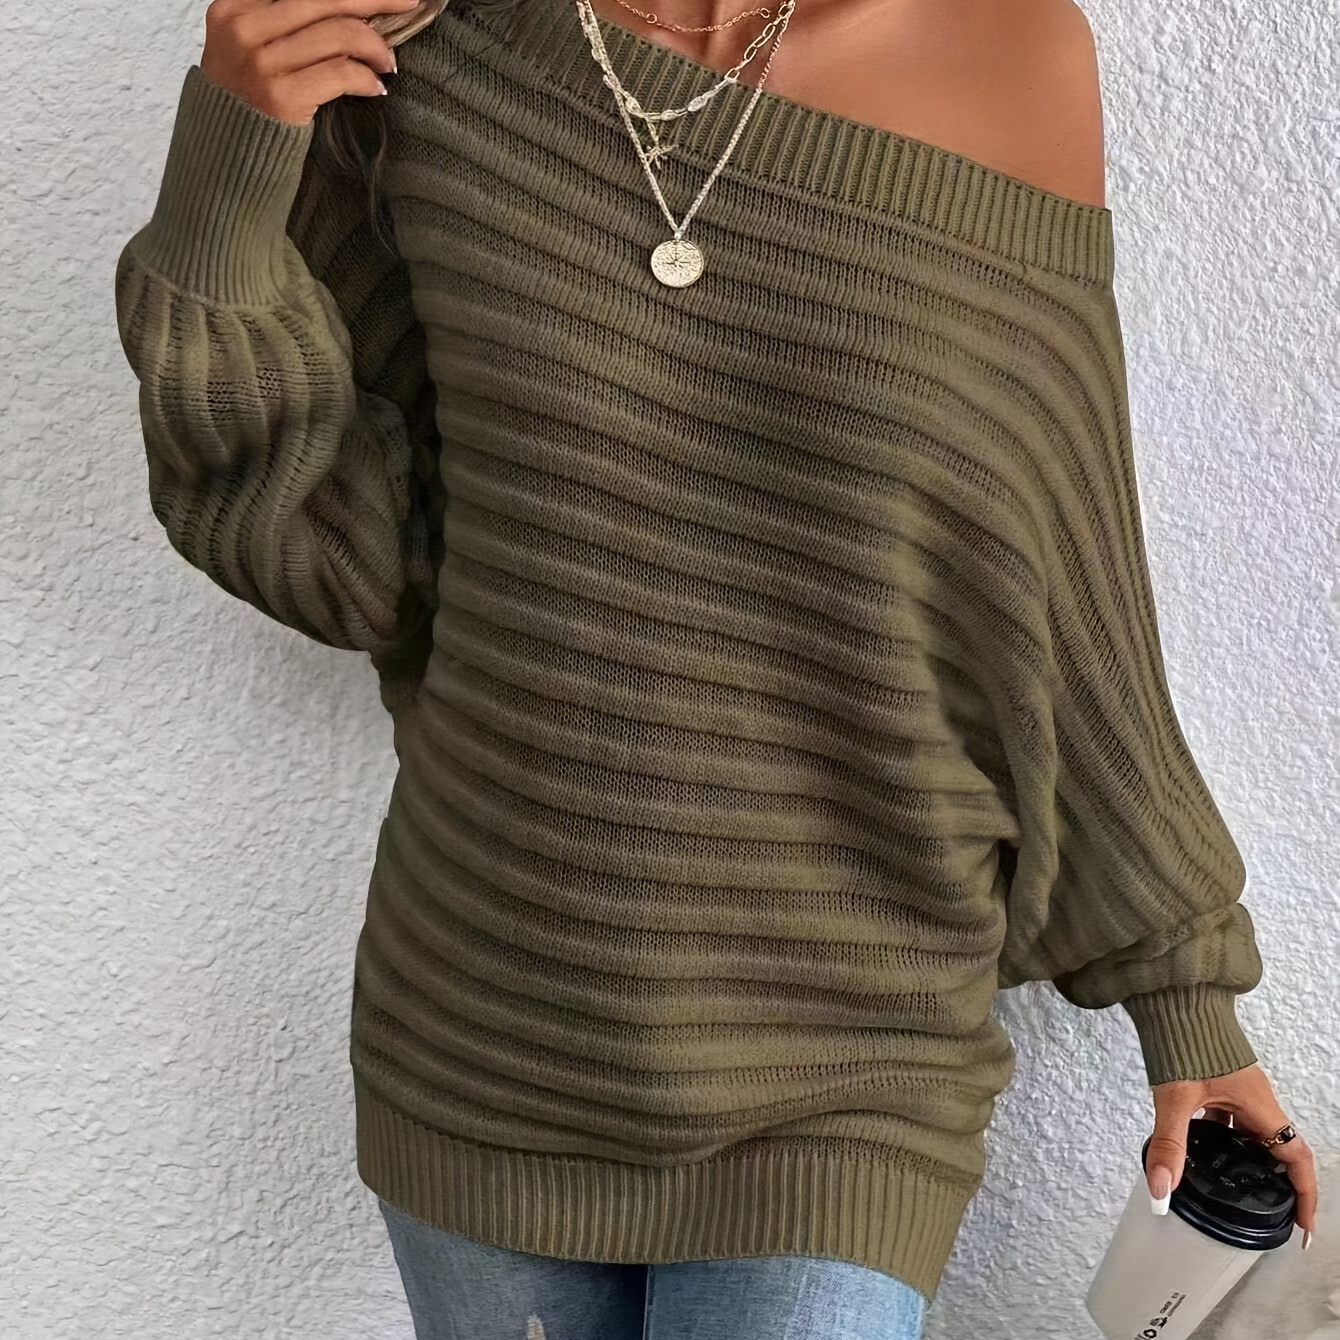 

Slant Shoulder Solid Color Sweater, Elegant Lantern Sleeve Loose Knitted Top For Spring & Fall, Women's Clothing